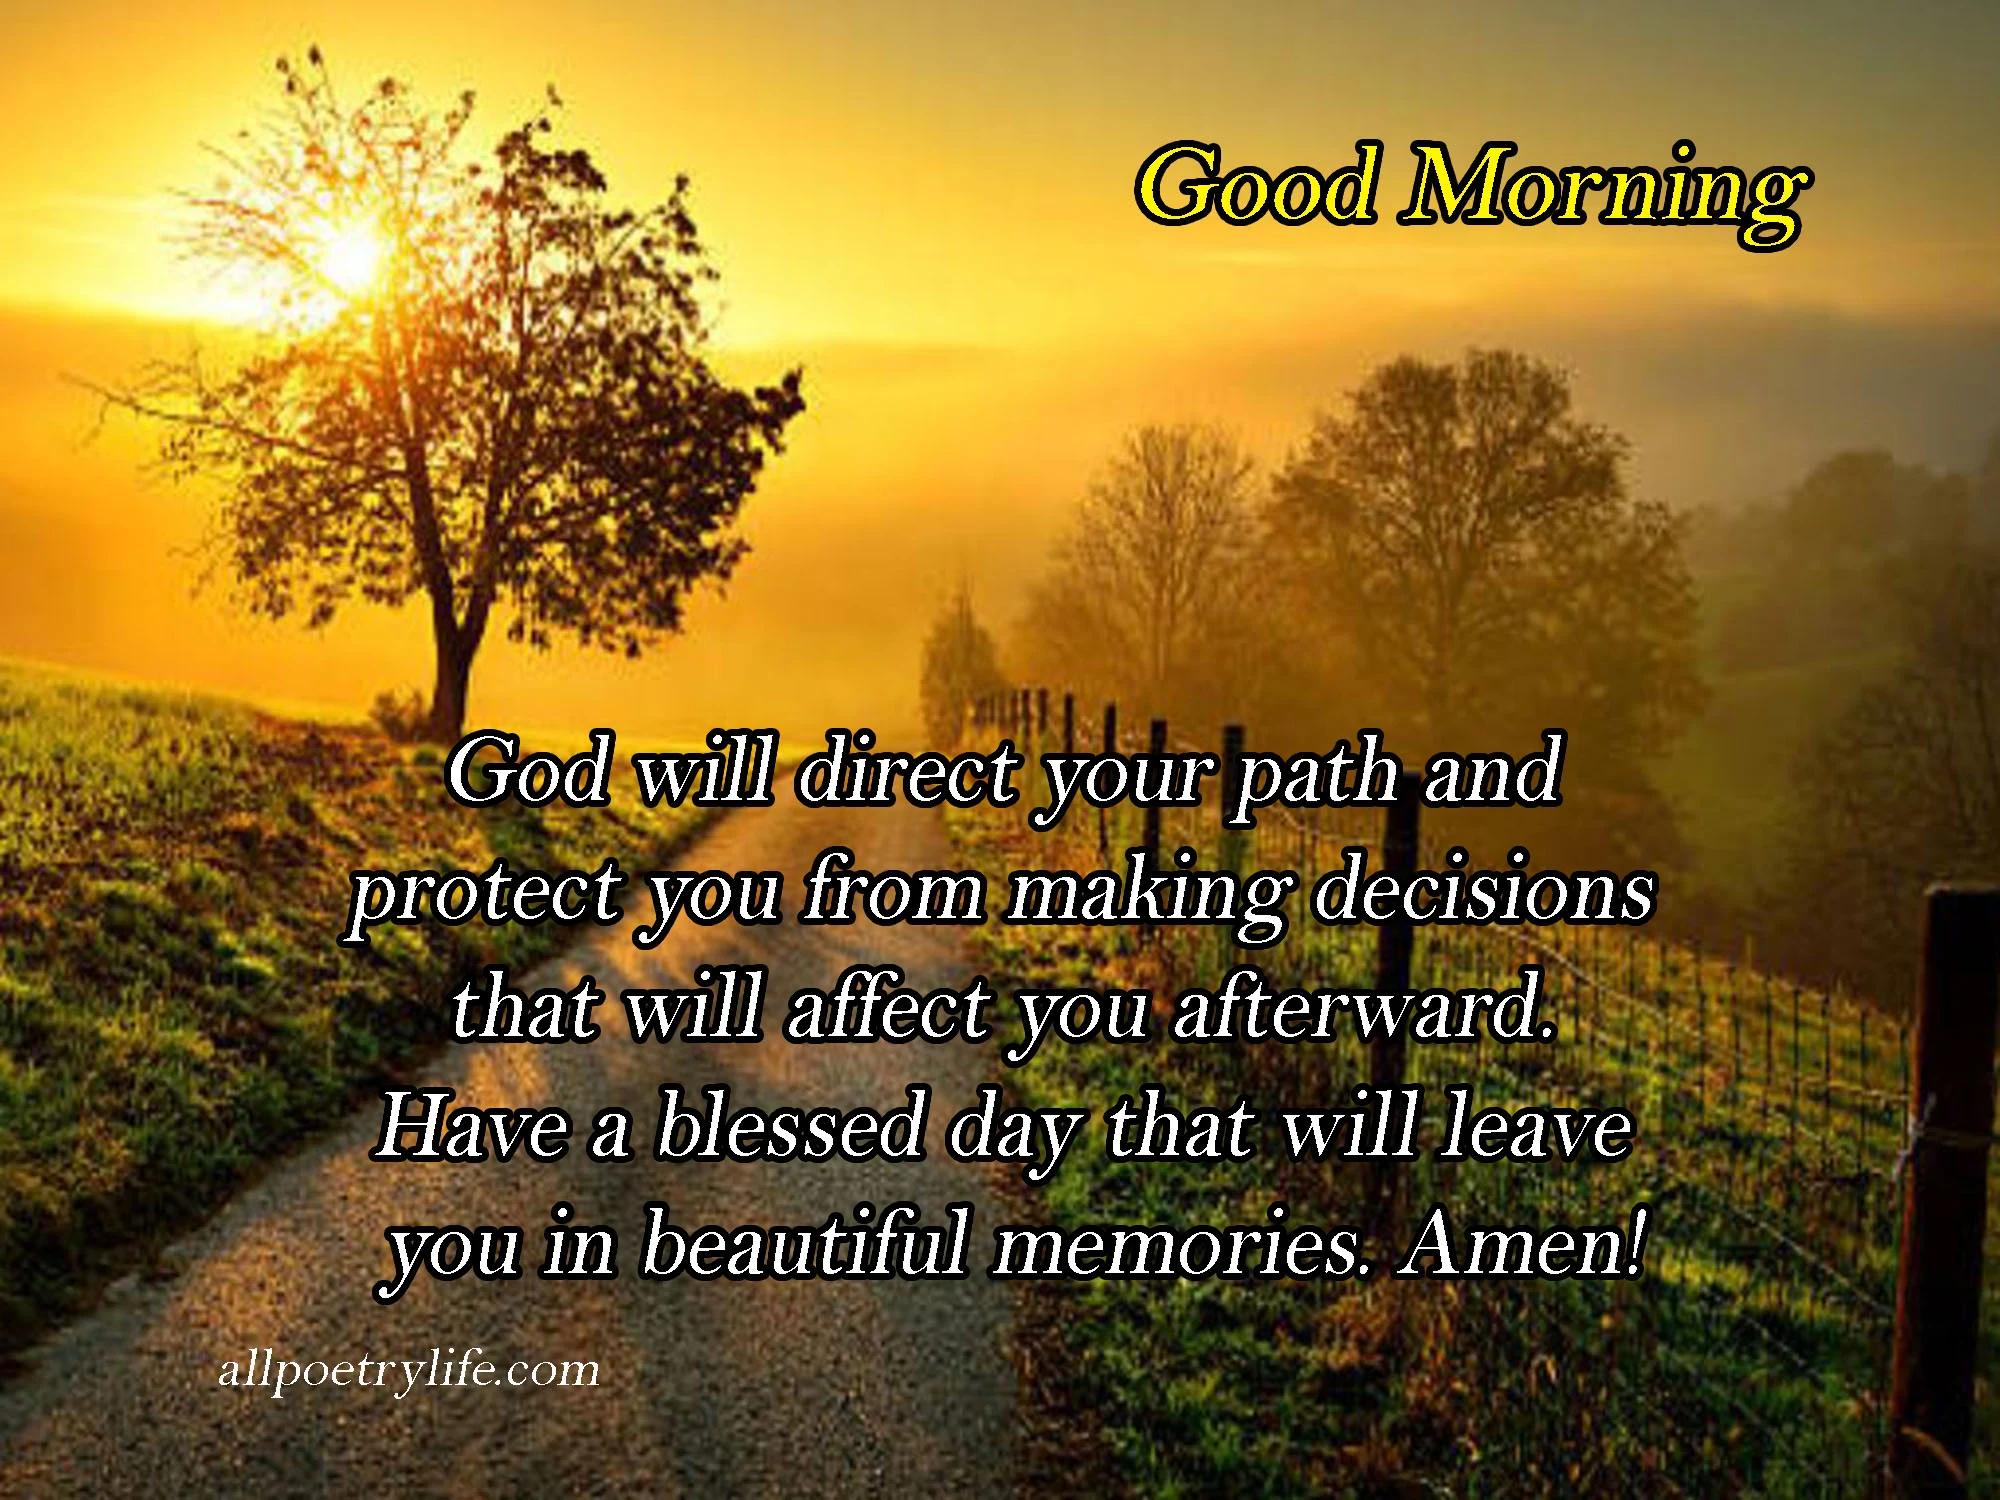 good morning monday blessings images and quotes, monday morning greetings and blessings, monday morning blessings images, happy monday blessings images, monday morning blessings quotes and images, good morning monday blessings images, blessed monday morning images, good monday morning blessings images, monday morning blessing images, monday good morning blessings images, good morning monday blessings quotes and images, blessed monday images and quotes, monday morning blessings images and quotes, happy blessed monday images, monday god blessing images, monday morning blessing quotes and images, good morning monday bible verses images, good morning monday blessings messages, happy monday blessing images, god bless monday images, blessed monday good morning images, happy and blessed monday images, monday morning bible verses images, inspirational monday blessings, monday blessing image good morning, good morning happy monday blessings images, good morning monday blessing images and quotes, blessed monday quotes images, god bless your monday images, monday blessing quotes with images, good morning quotes, good morning wishes, morning quotes, good morning status, good morning images with quotes, morning wishes, good morning images with quotes for whatsapp, good morning love messages, good morning thoughts, good morning quotes for love, good morning message to a friend, good morning blessings, good day quotes, good morning quotes marathi, good morning quotes for her, good morning motivational quotes, monday morning quotes, good morning inspirational quotes, beautiful good morning quotes, sunday morning quotes, morning thoughts, good morning quotes in english, inspirational morning quotes,